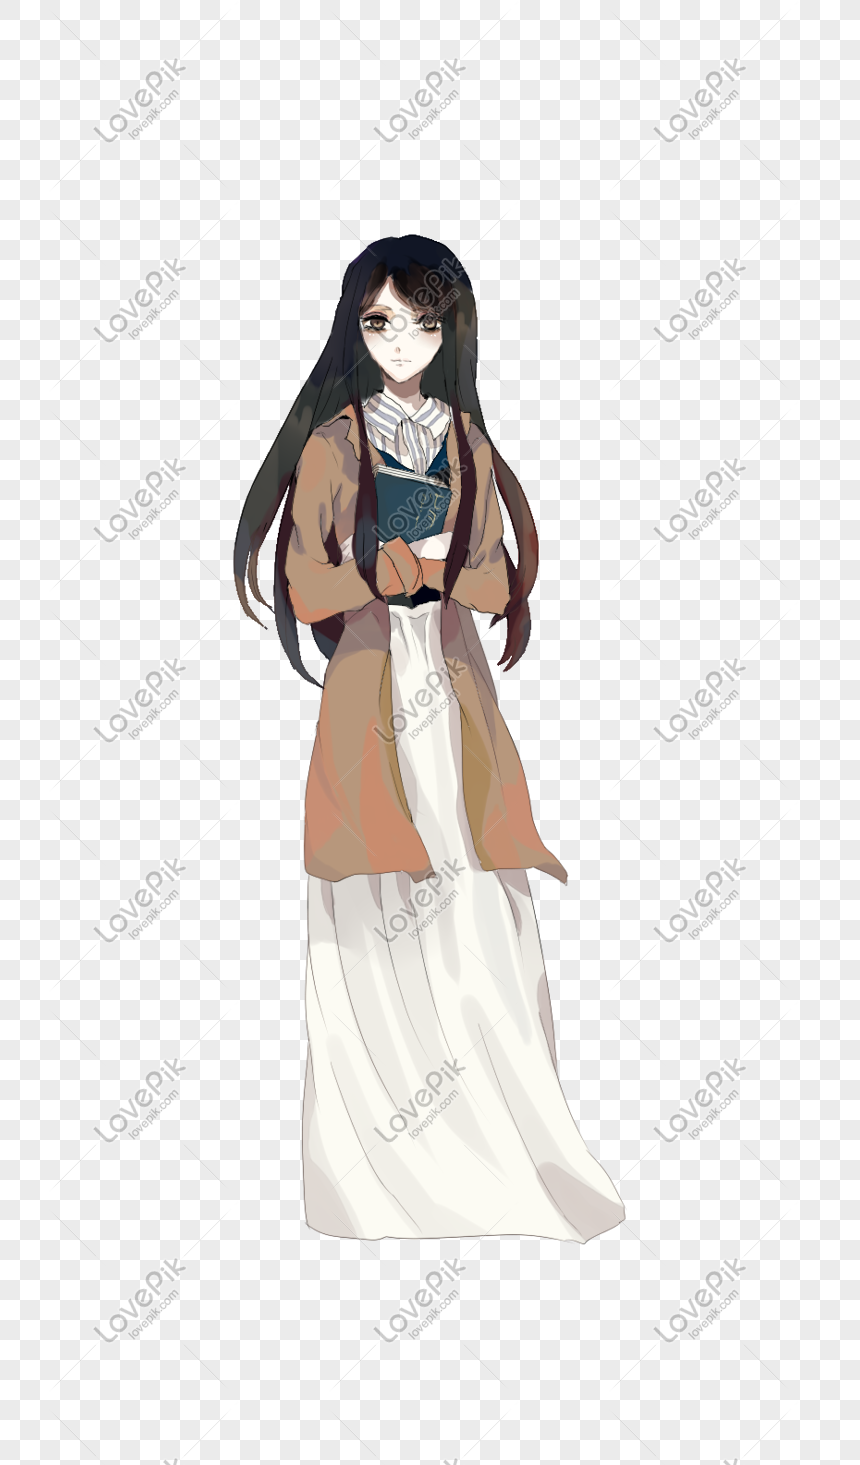 The Opening Of The School Literature Society Recruits New Anime PNG  Transparent Image And Clipart Image For Free Download - Lovepik | 611186397